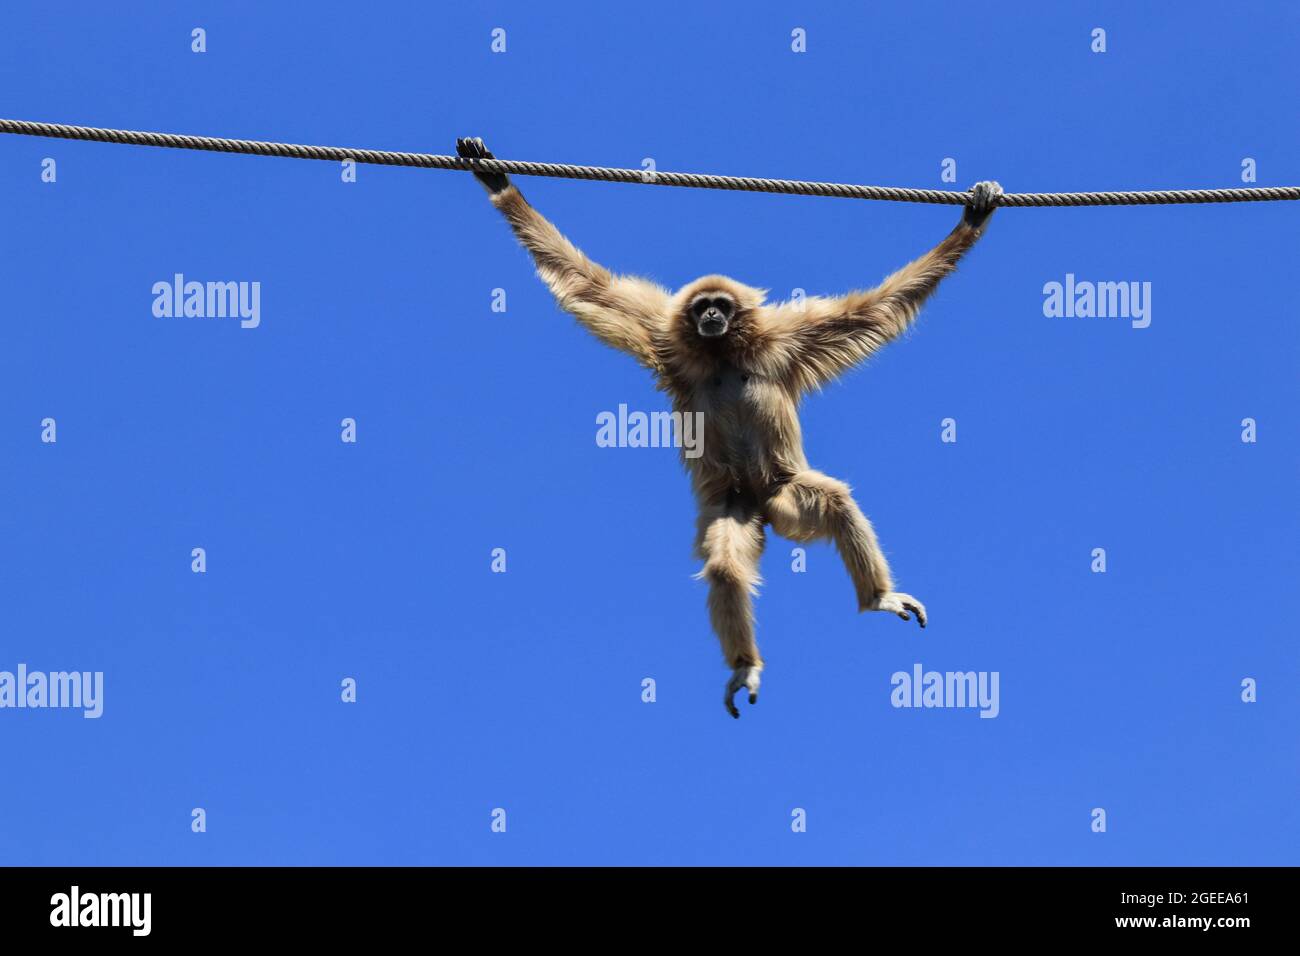 Common gibbon swinging from rope with blue sky in background Stock Photo